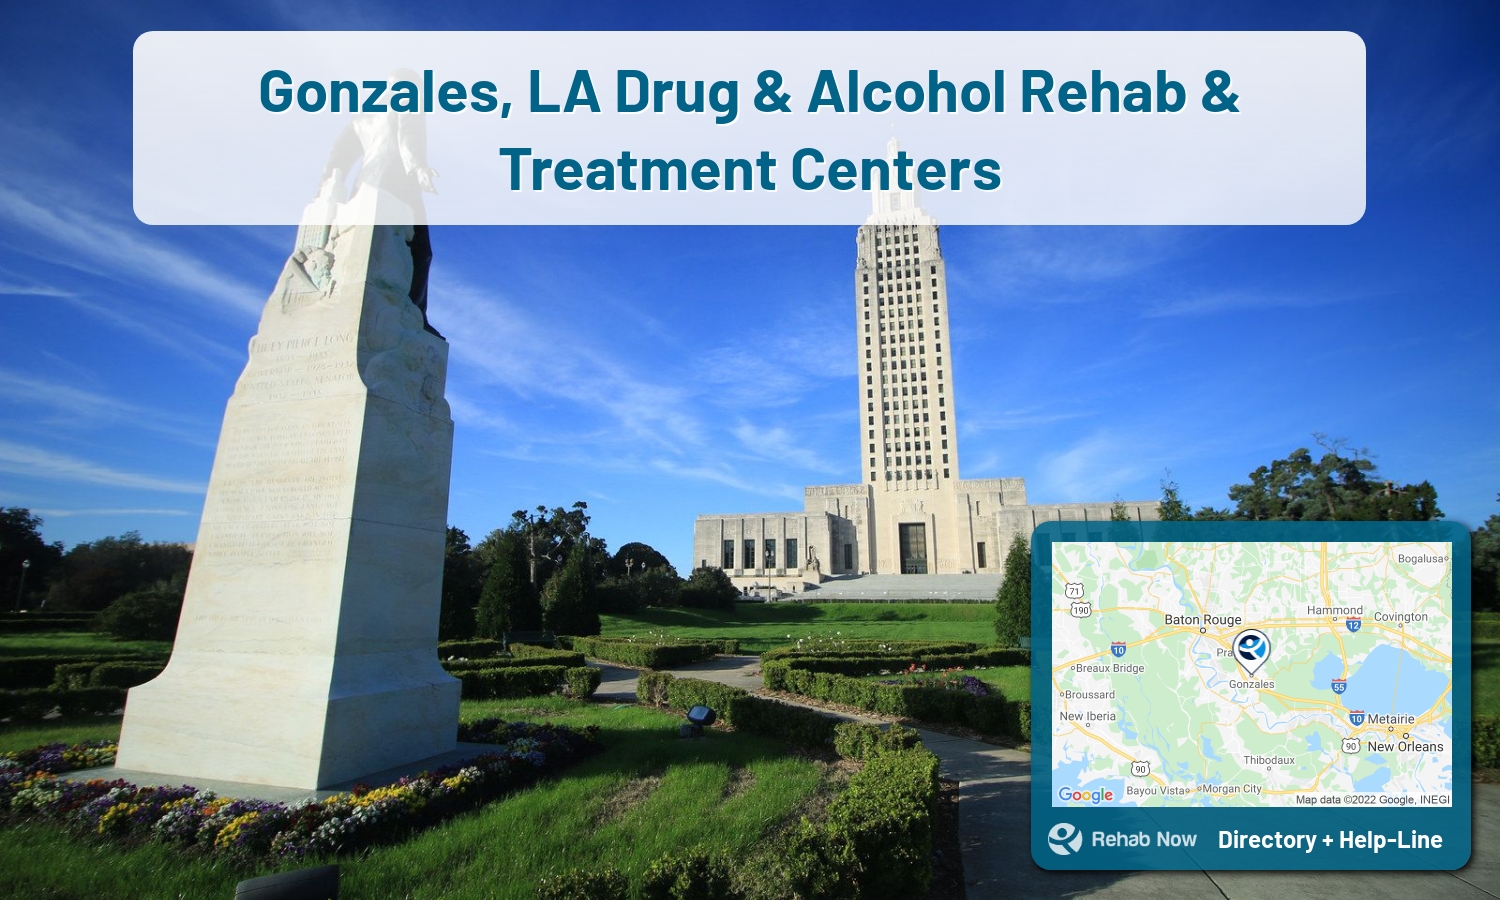 Gonzales, LA Treatment Centers. Find drug rehab in Gonzales, Louisiana, or detox and treatment programs. Get the right help now!